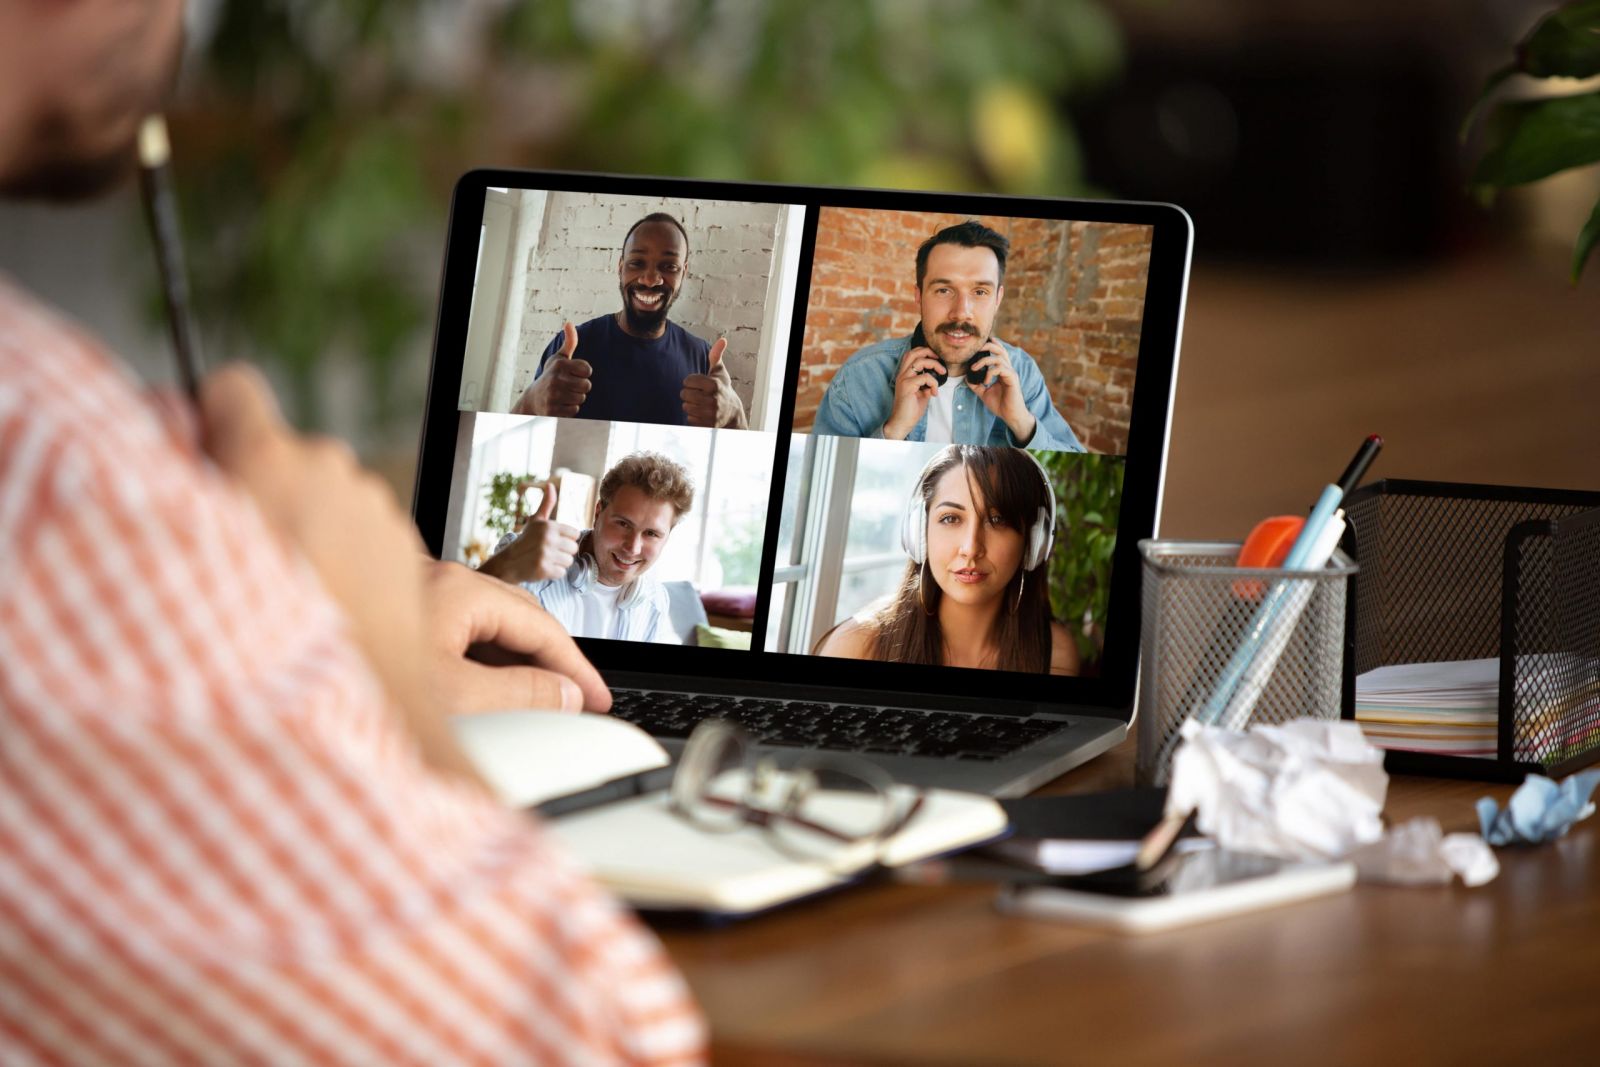 Four Ways To Build Trust With Remote Employees